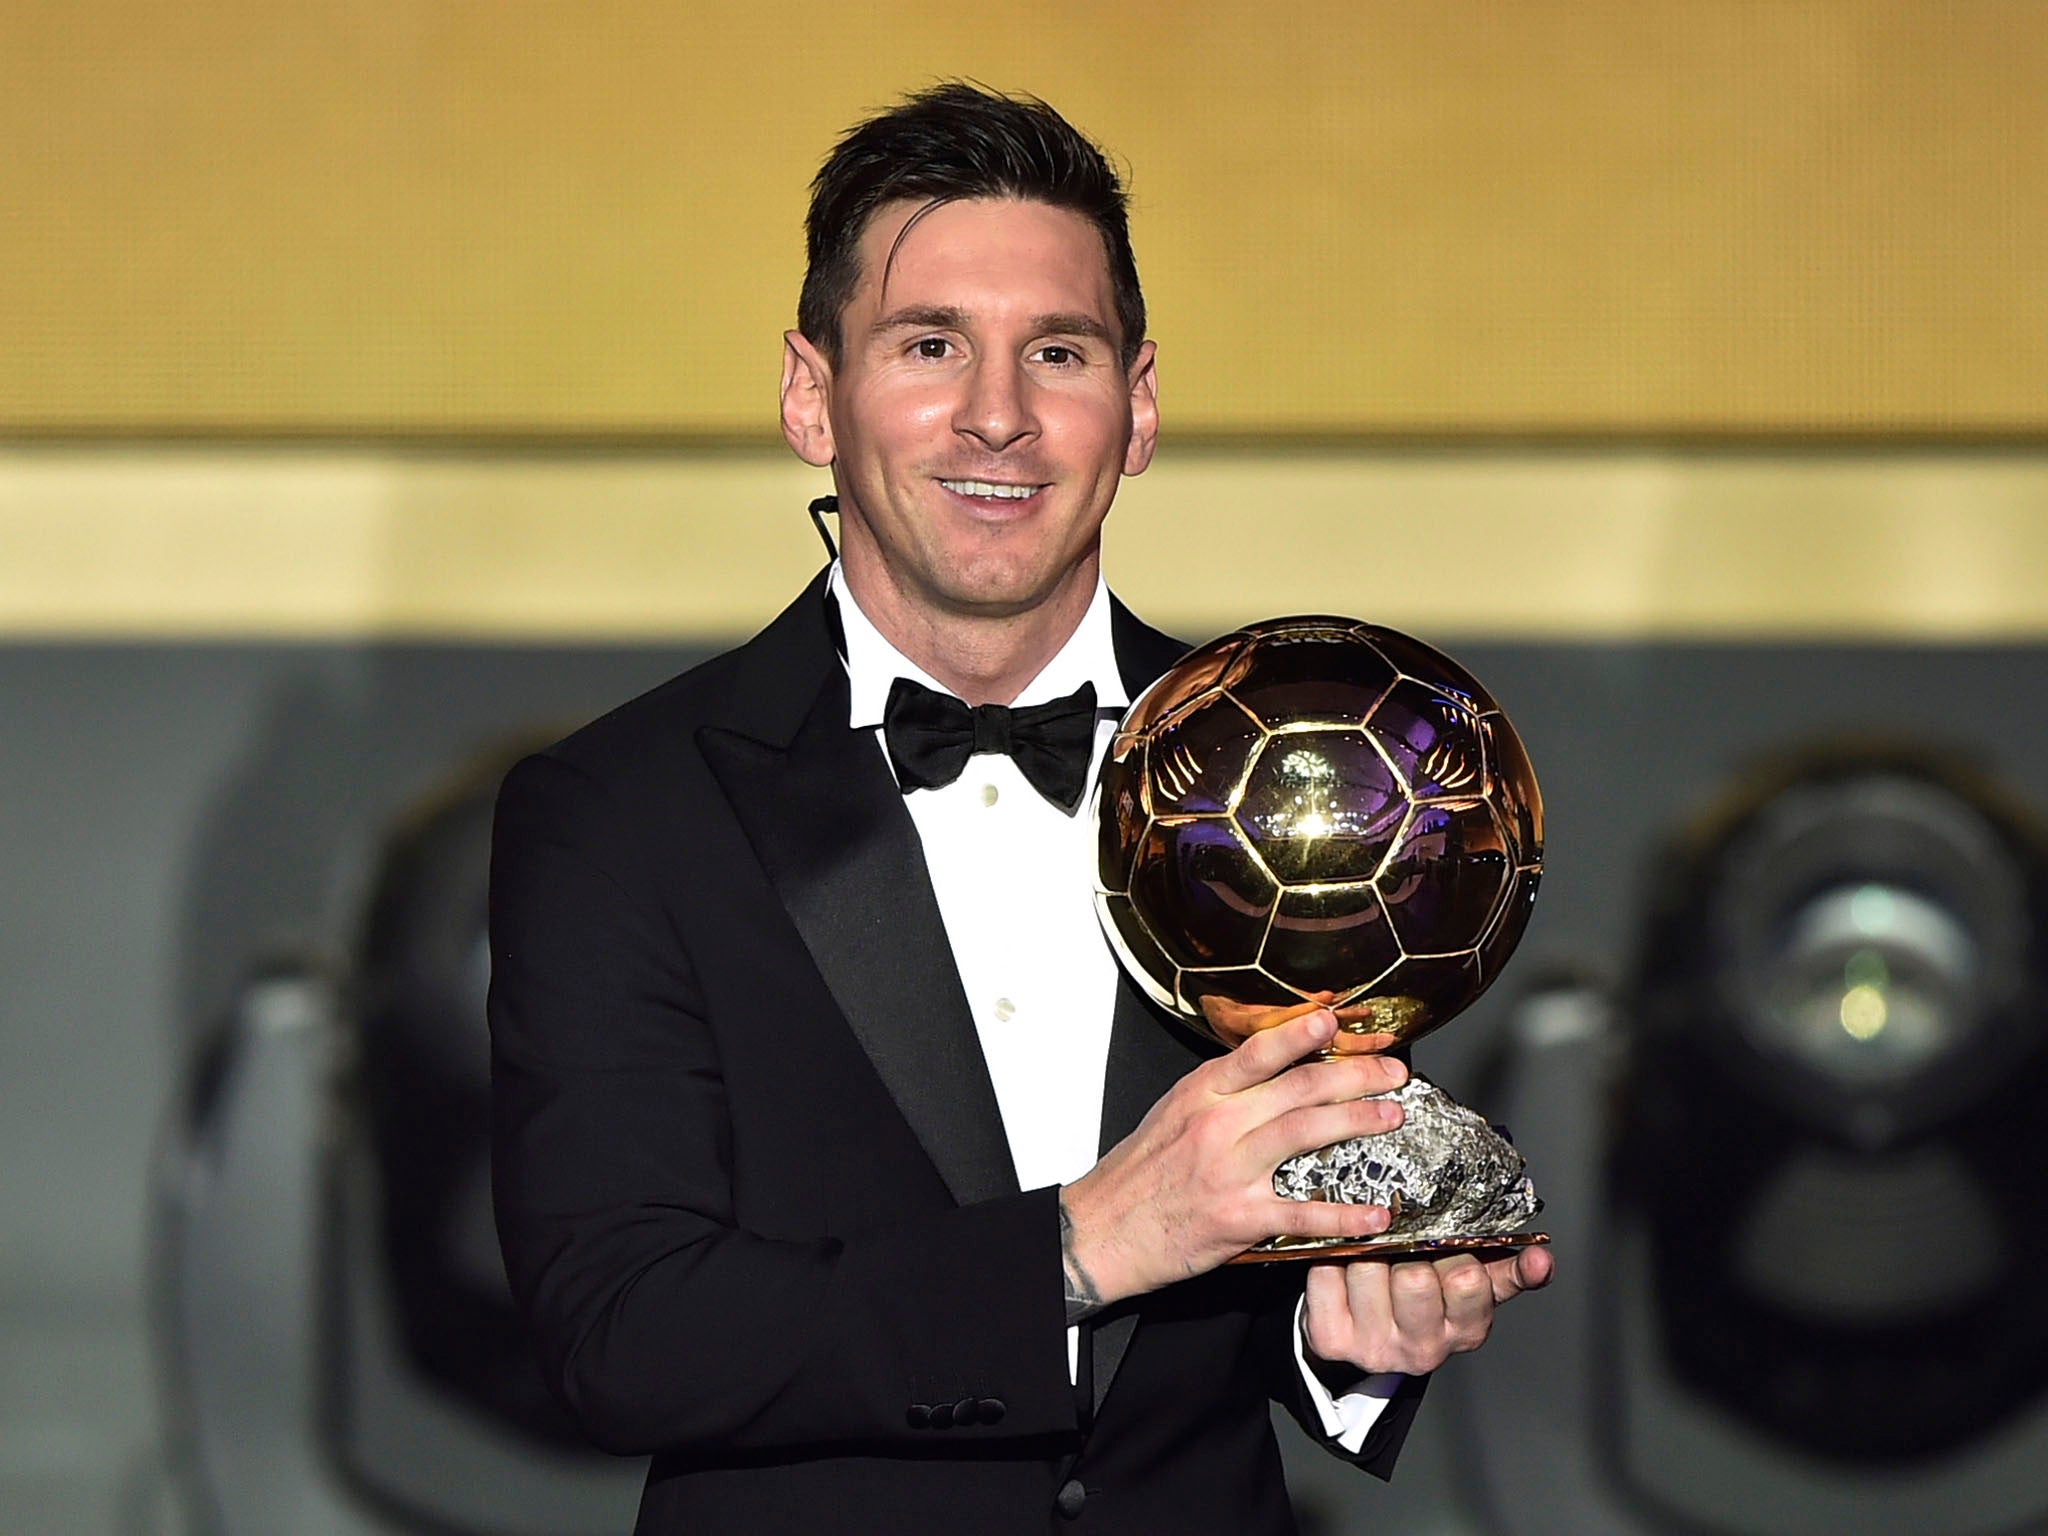 Lionel Messi will be the last winner of the Fifa Ballon d'Or